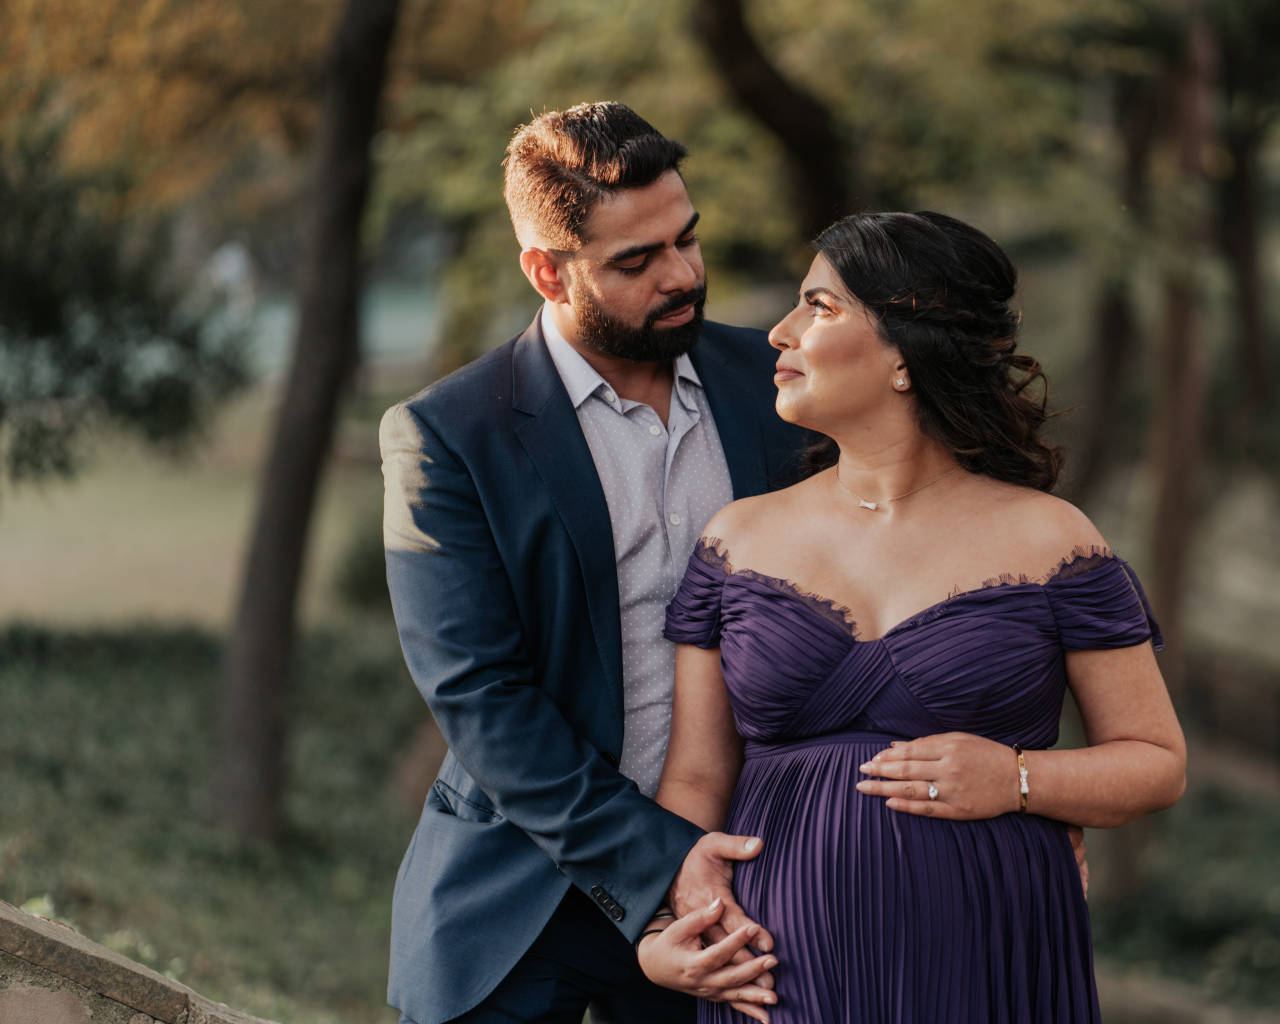 How to Do a Maternity Photoshoot – Plan, Choose the Right Poses, and Get  the Whole Family Involved | Learn Photography by Zoner Photo Studio